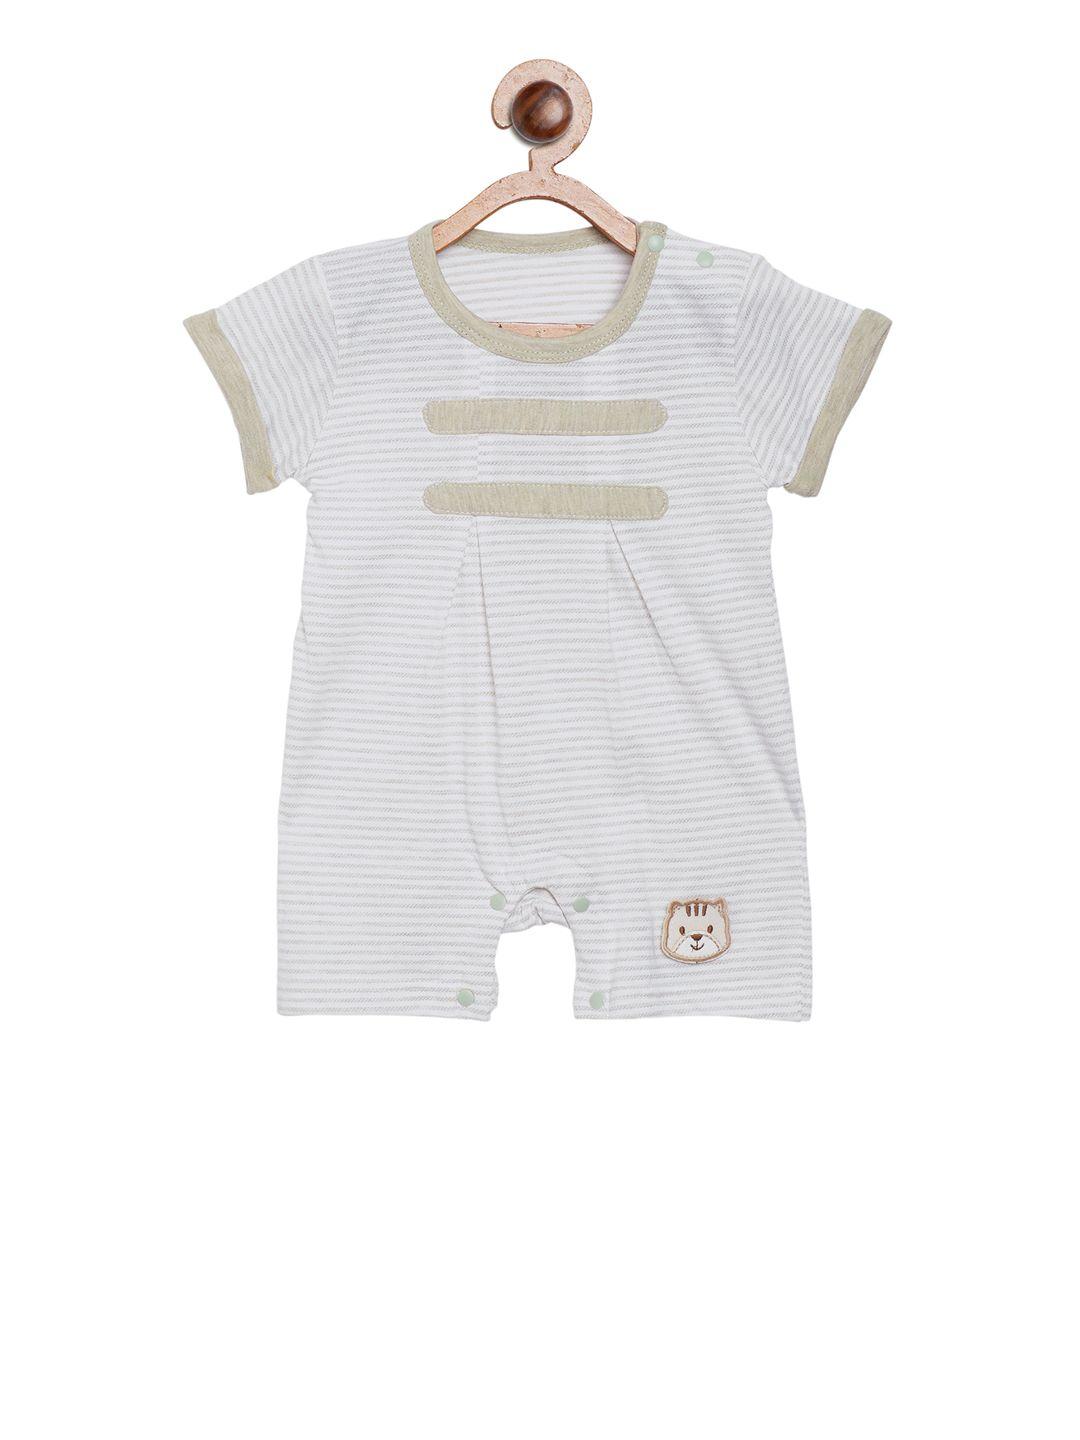 camey kids off-white & beige striped rompers